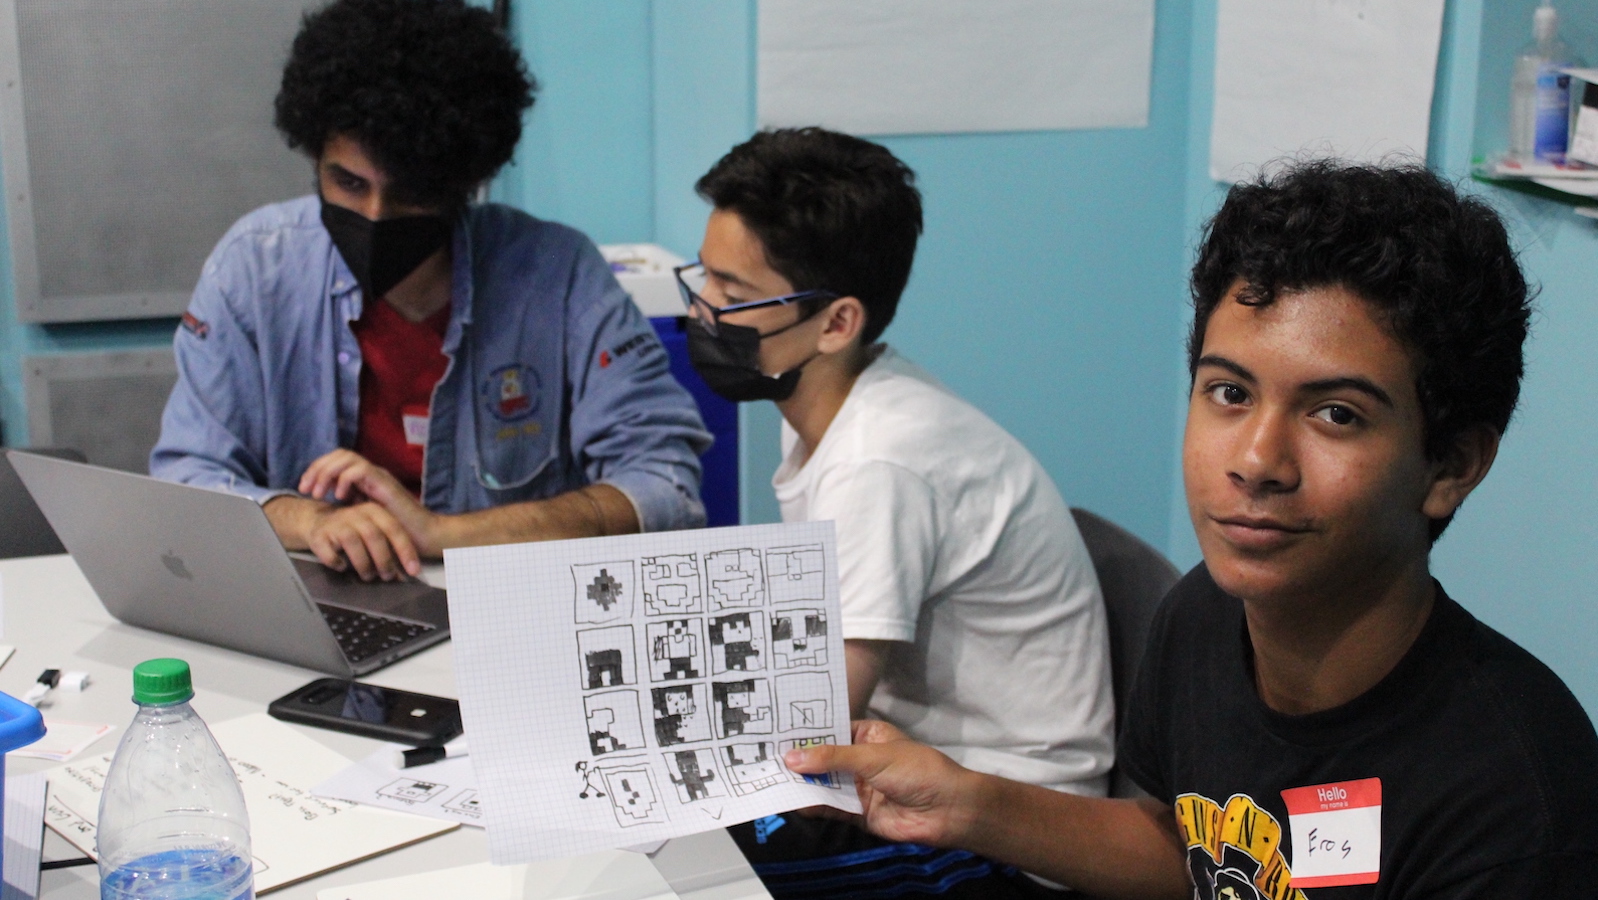 Three teenagers sit at a workshop table; the one in the foreground smiles at camera while he holds up a worksheet with black and white graphic designs on it.